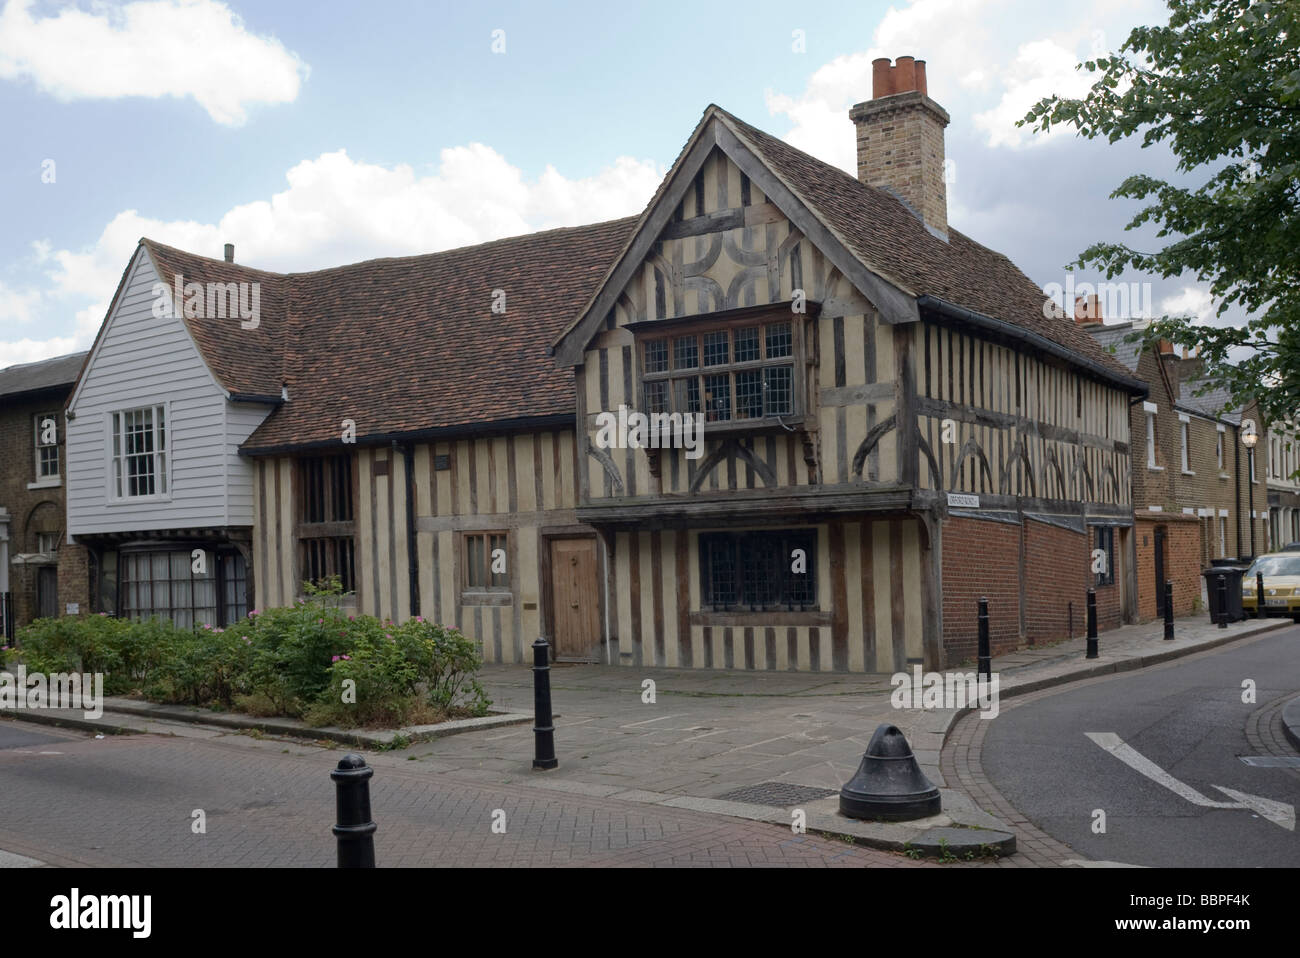 "The Ancient House" " Walthamstow Village" " Walthamstow Conservation Area" "London Borough of Waltham Forest" "East London GB Stock Photo